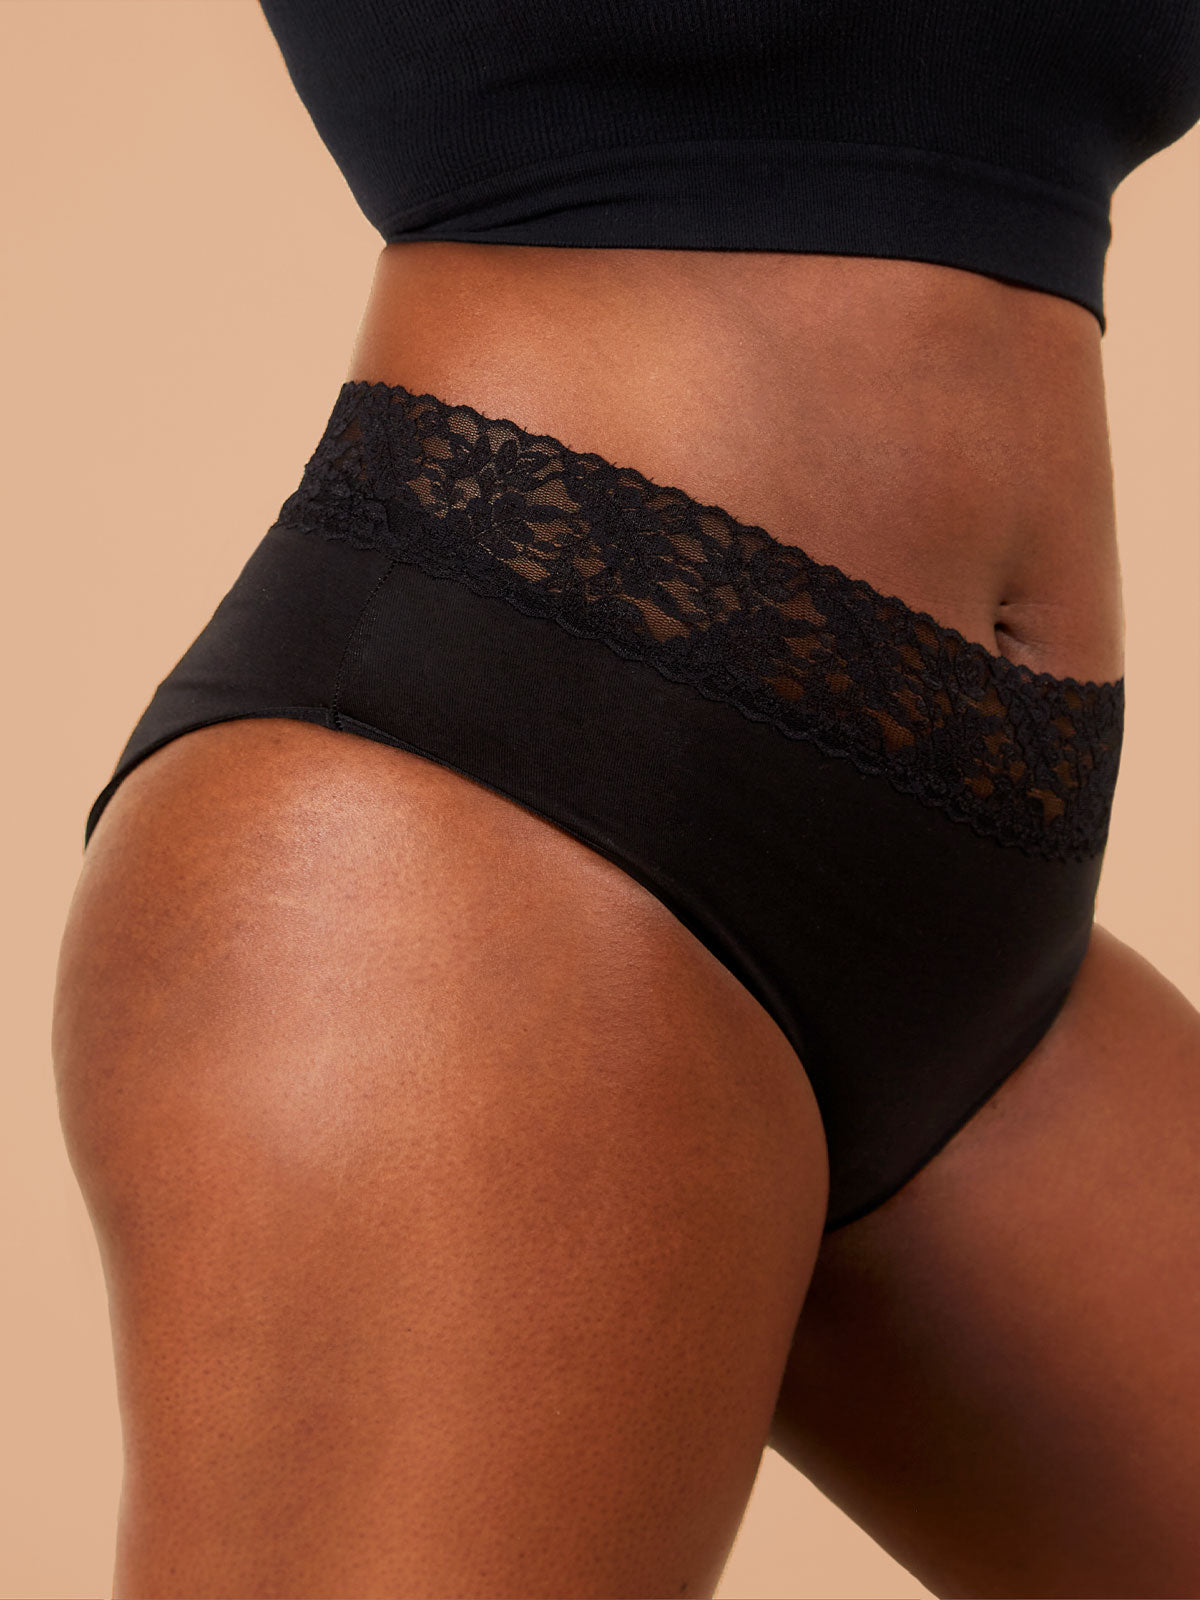 A close-up of a Black woman standing, showcasing black period pants with a floral lace trim. The image highlights the intricate details of the underwear, emphasizing the lace trim and fabric texture.